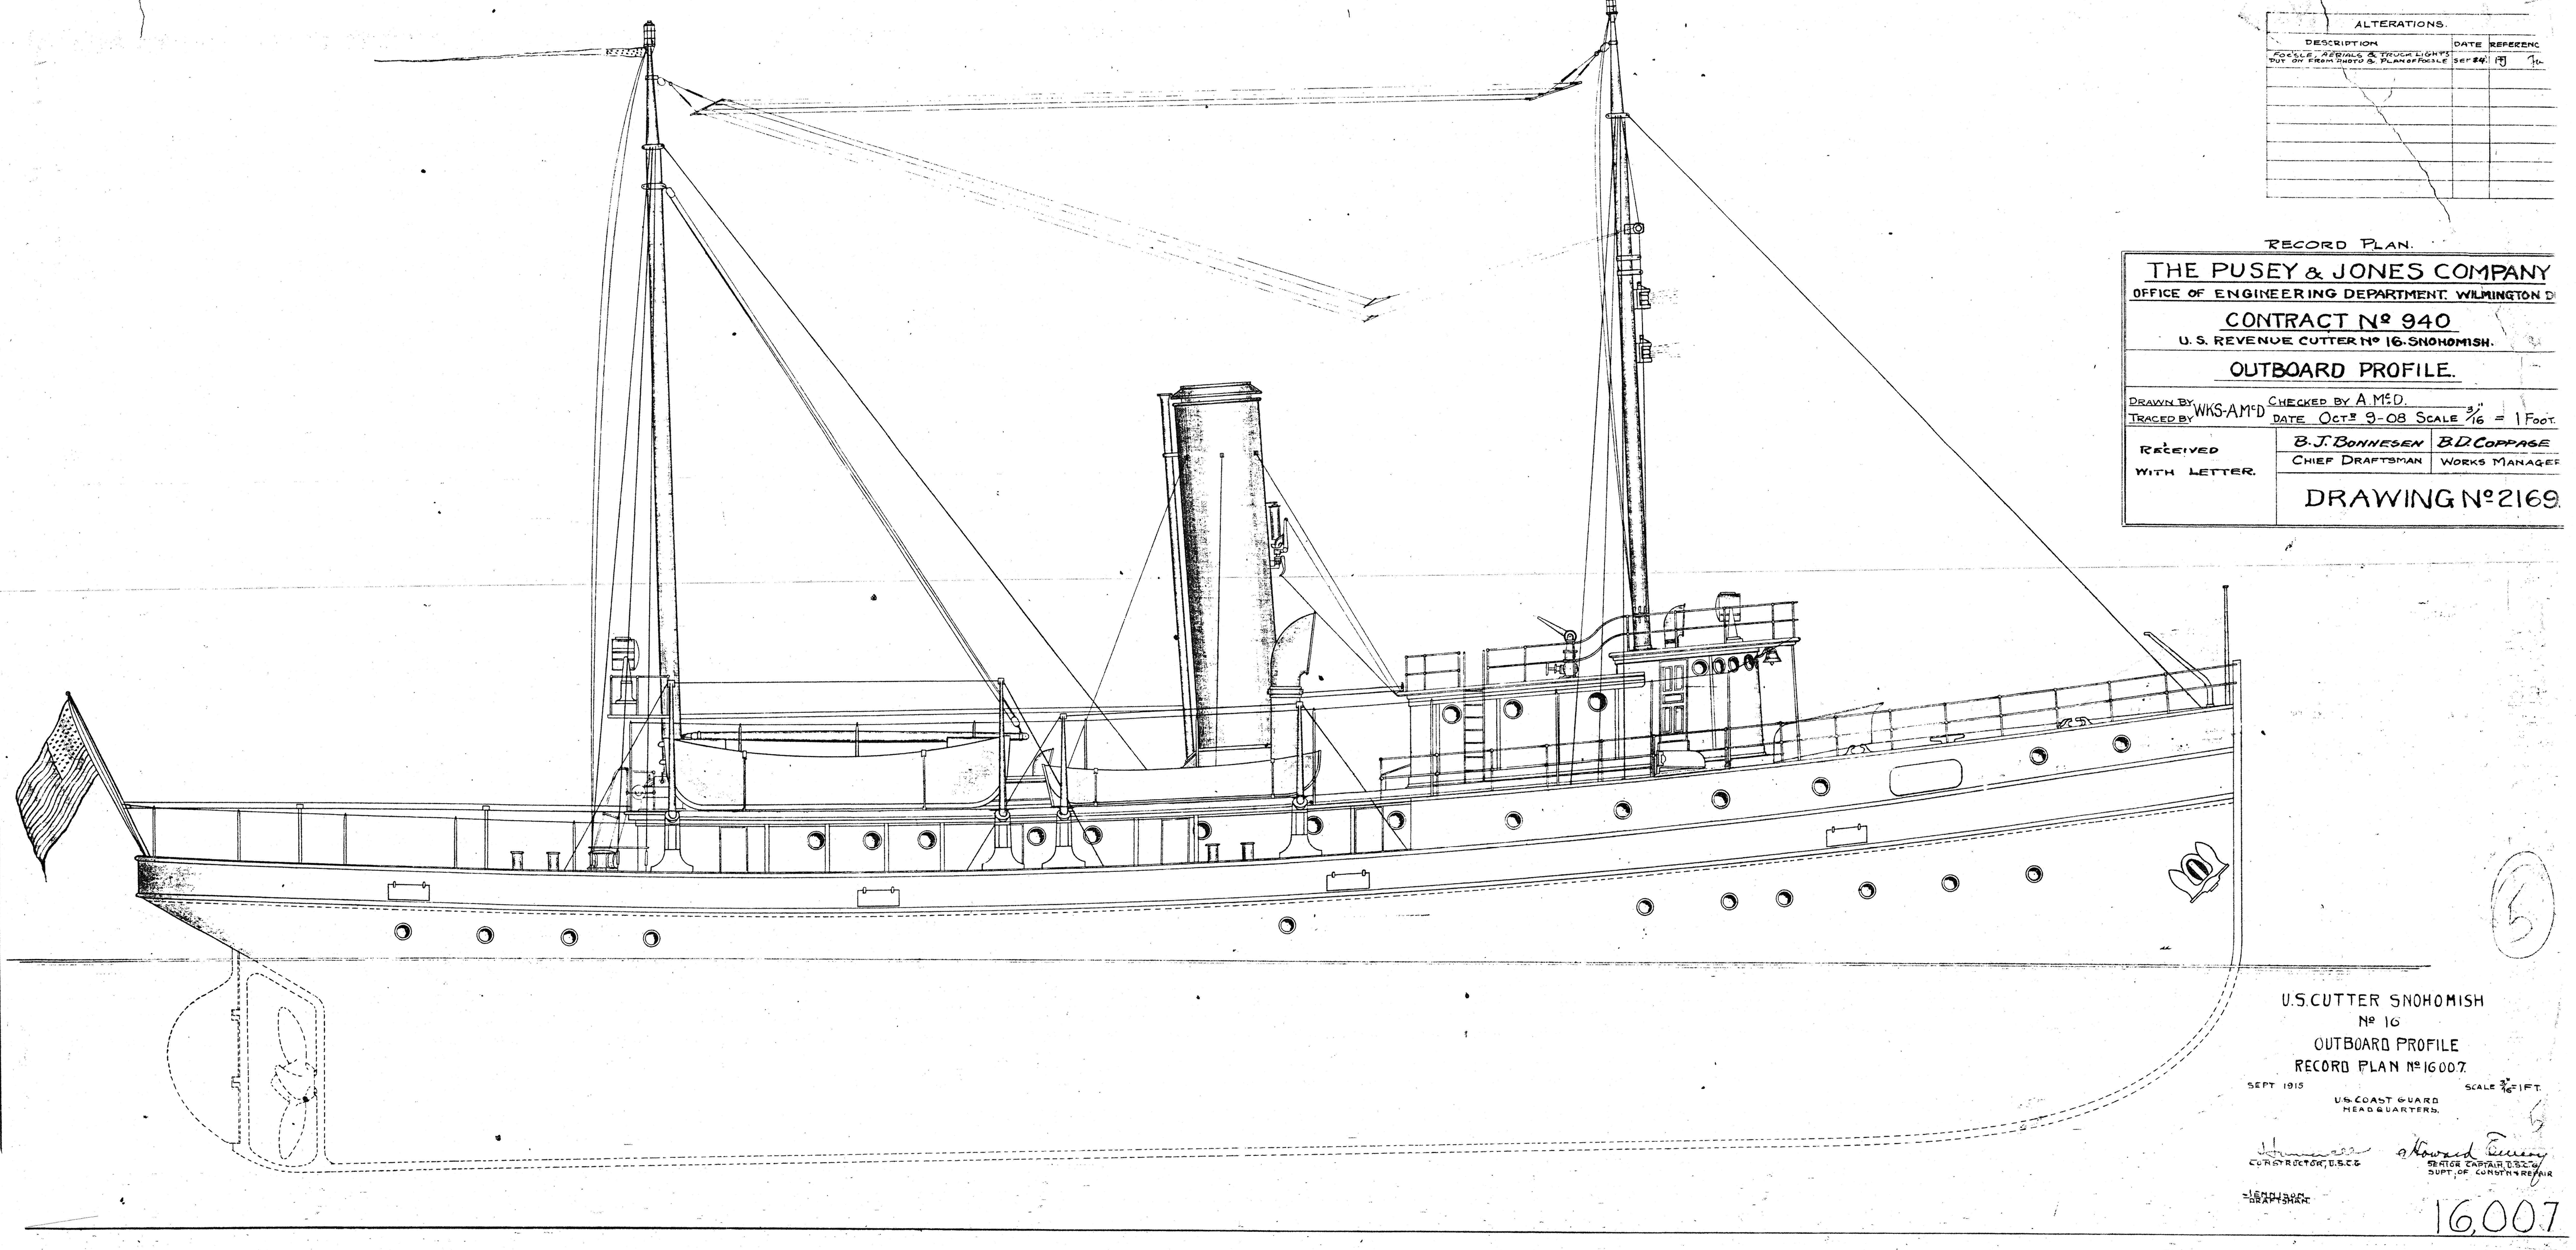 Profile view of Snohomish from the plans of builder Pusey & Jones Shipbuilding Company in Wilmington, Delaware. (National Archives)